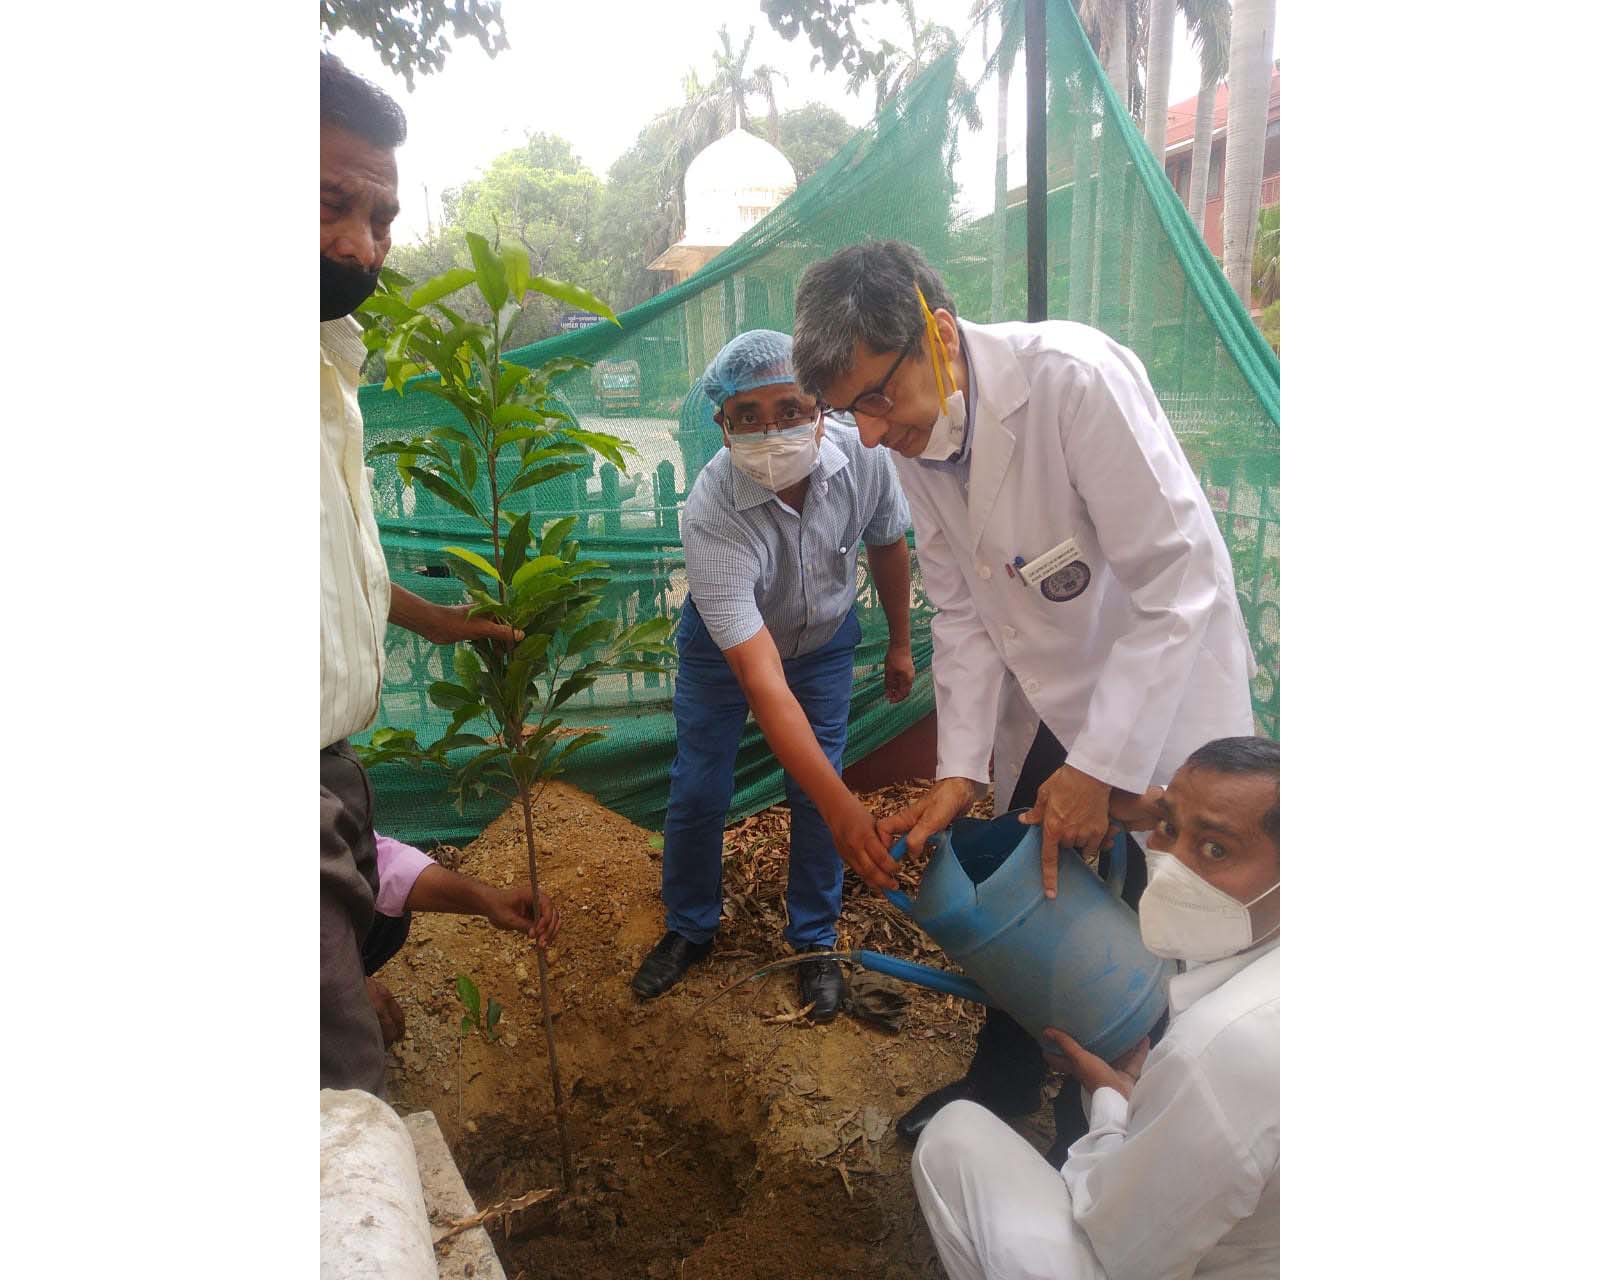 Tree plantation drive this monsoon at LHMC Maulsari (Mimusops elengi) - two more trees planted by Director N N Mathur in Inner open area of college to bring symmetry with 4 such trees